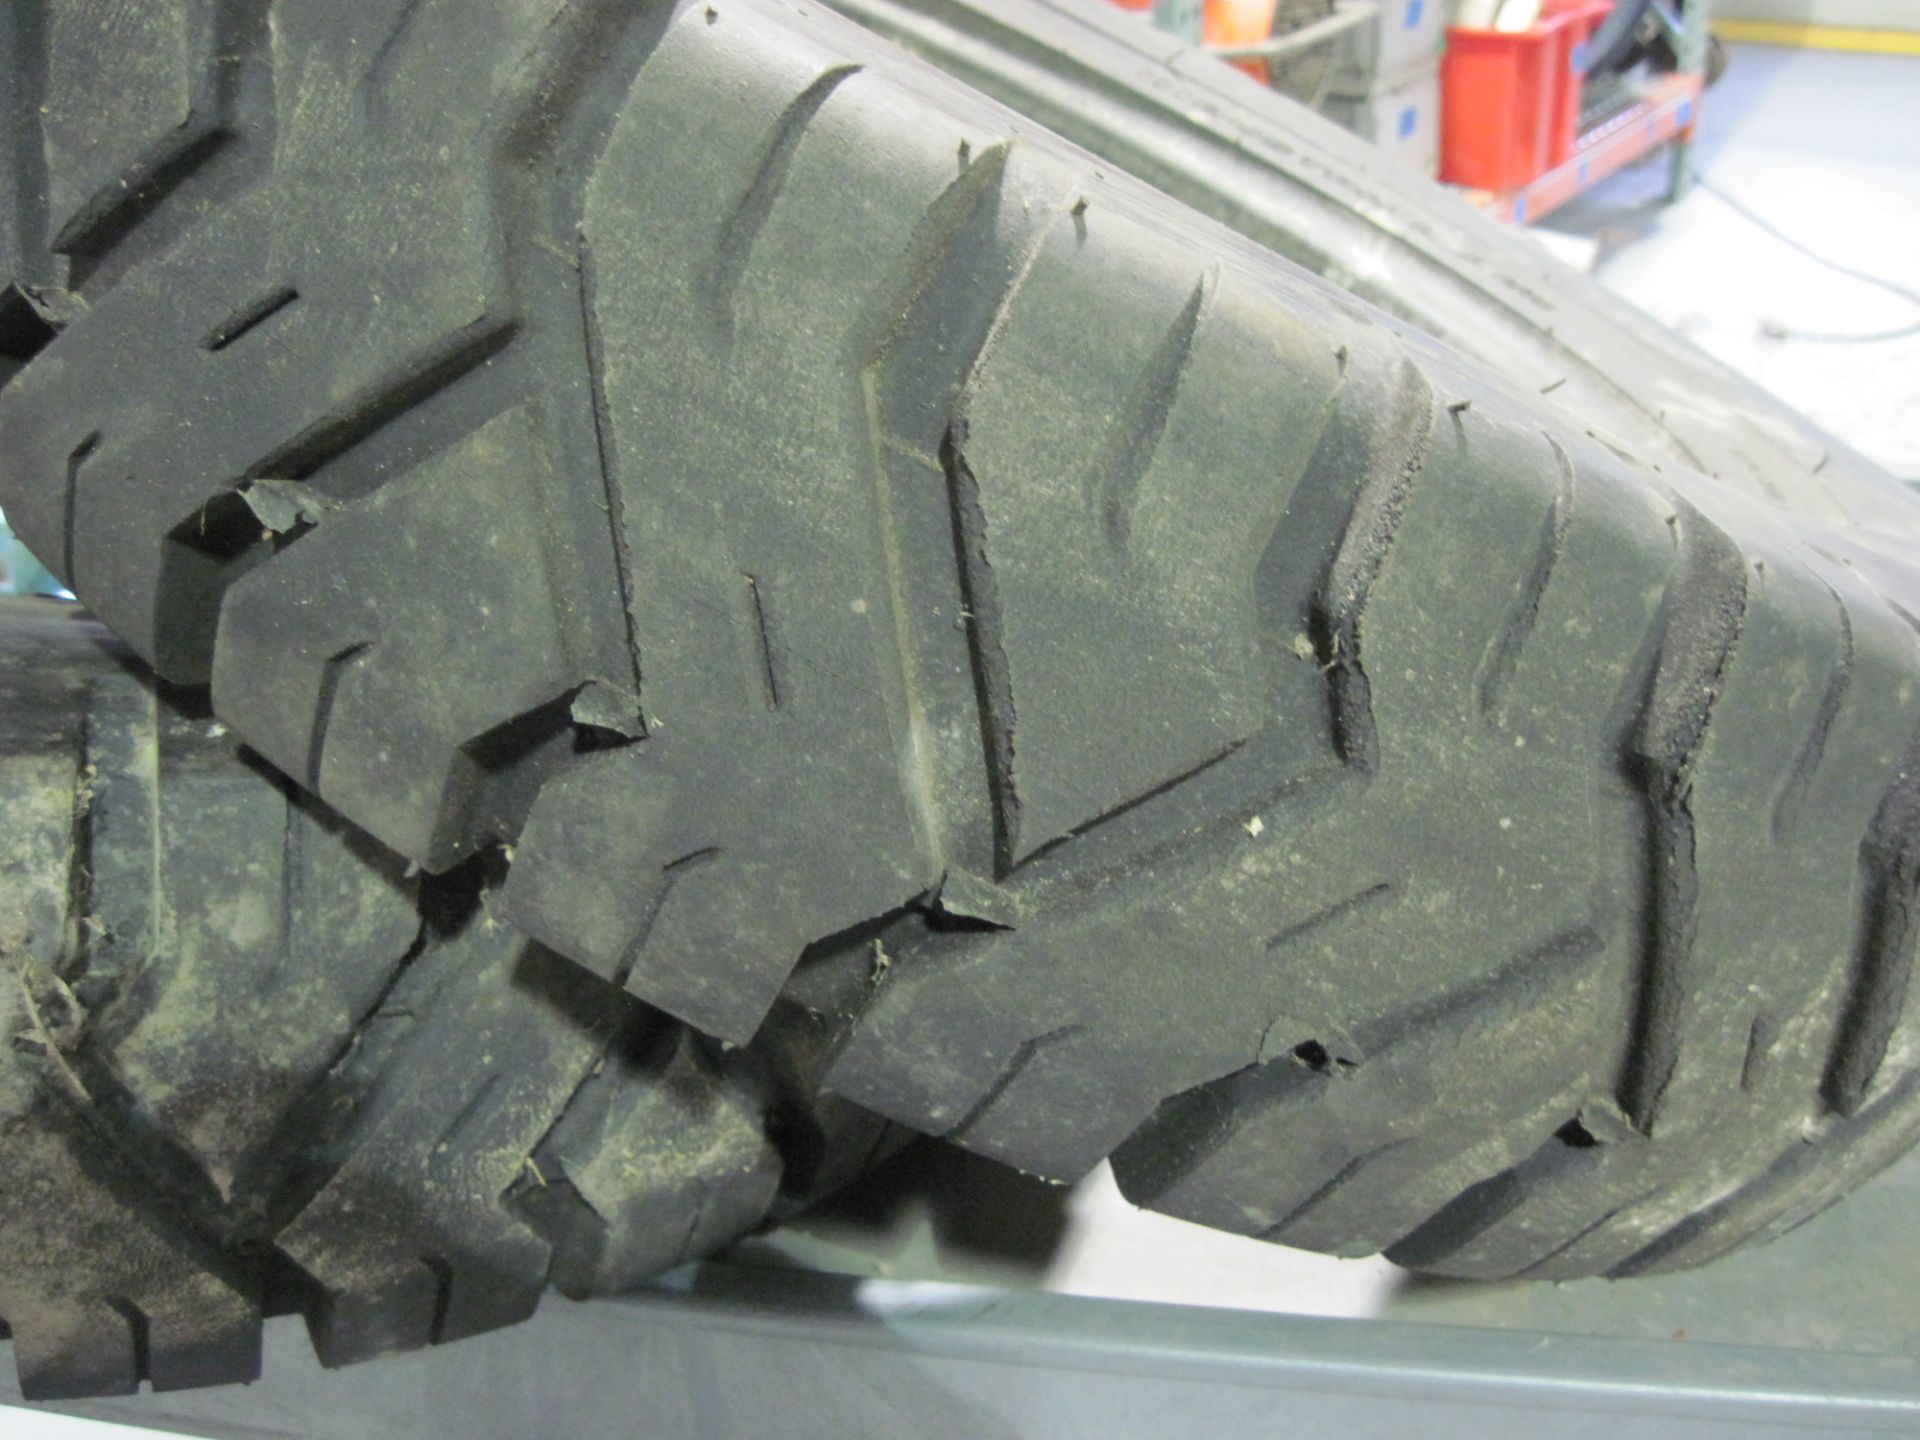 Set of (4) NEW/LIKE NEW Denman Industrial Lug Tire, 12 ply, rating 7.50-15 NHS, Nylon Tube Type. ( - Image 3 of 3